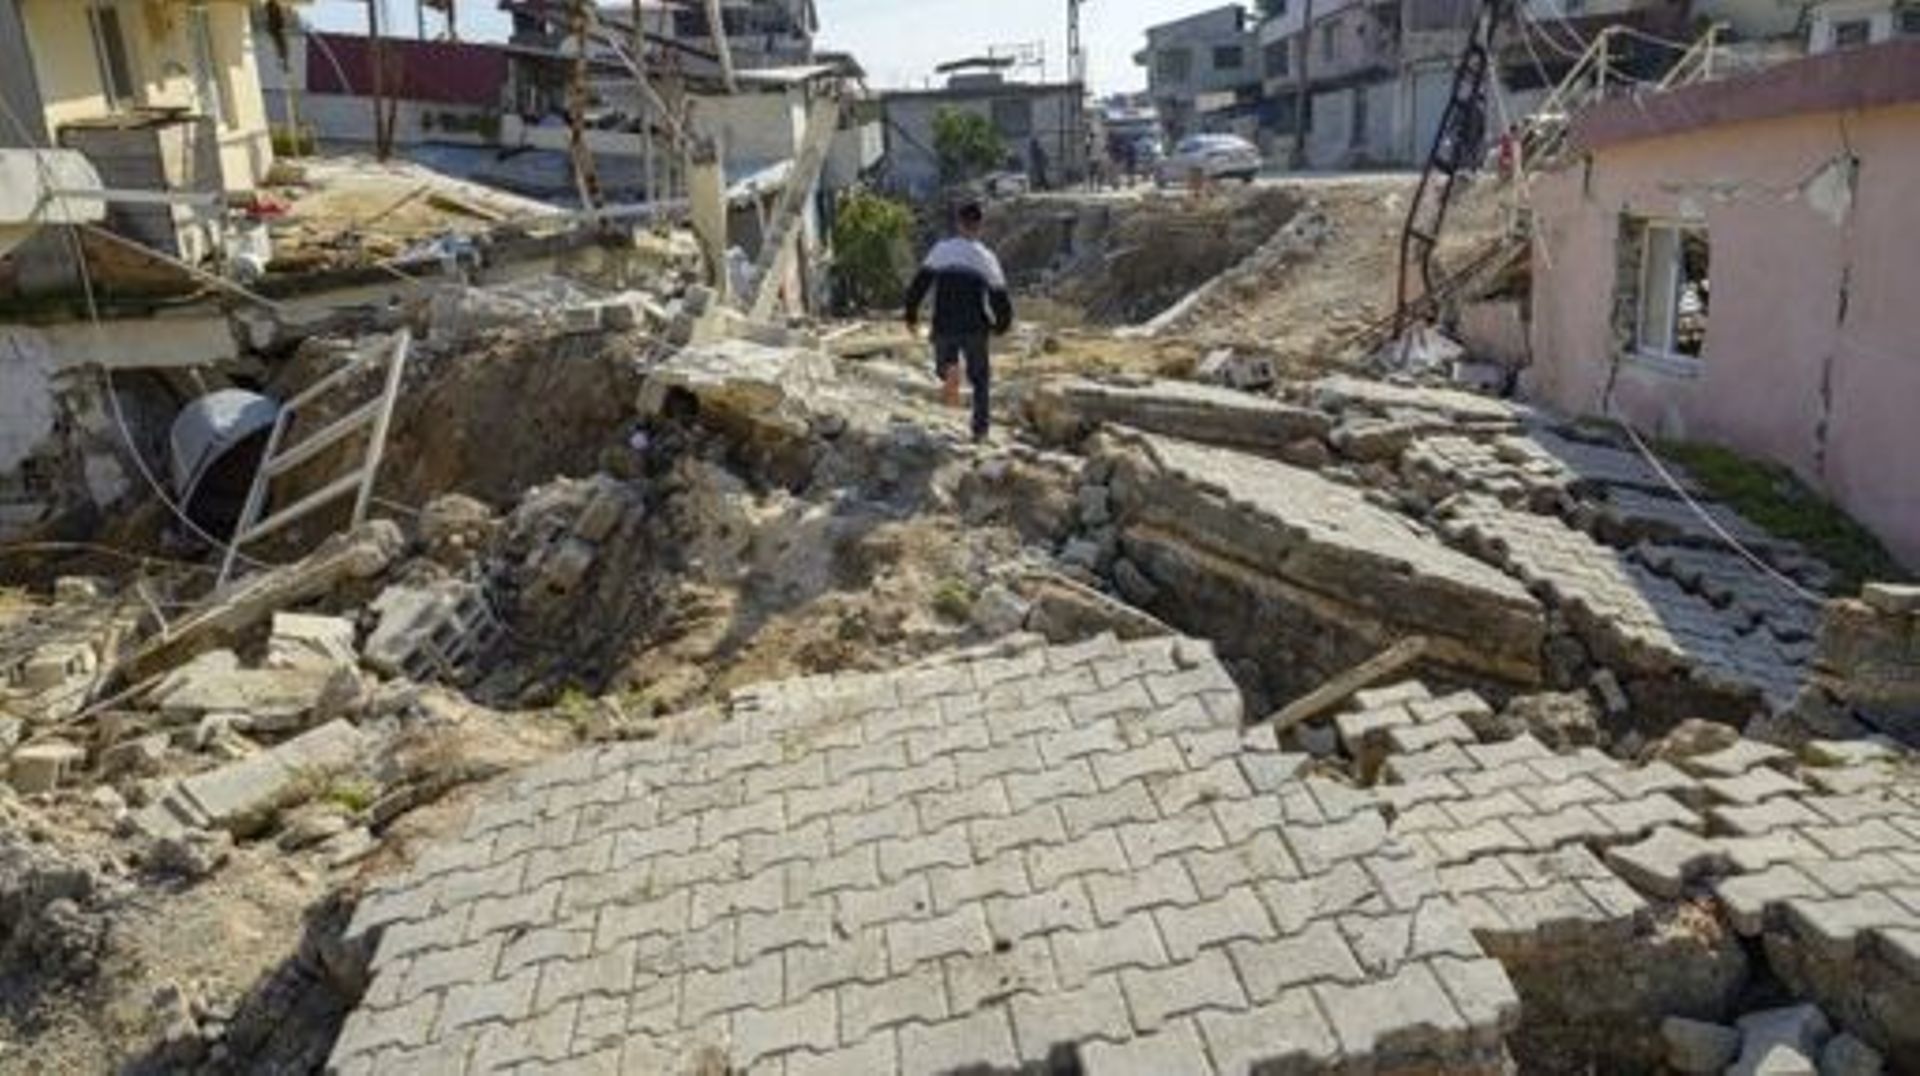 A youth runs across the upturned cobbled stoned street in Demirkopru, a small Turkish village now divided by a large crack in Hatay on February 18, 2023 . A 7.8-magnitude earthquake hit near Gaziantep, Turkey, in the early hours of February 6, followed by